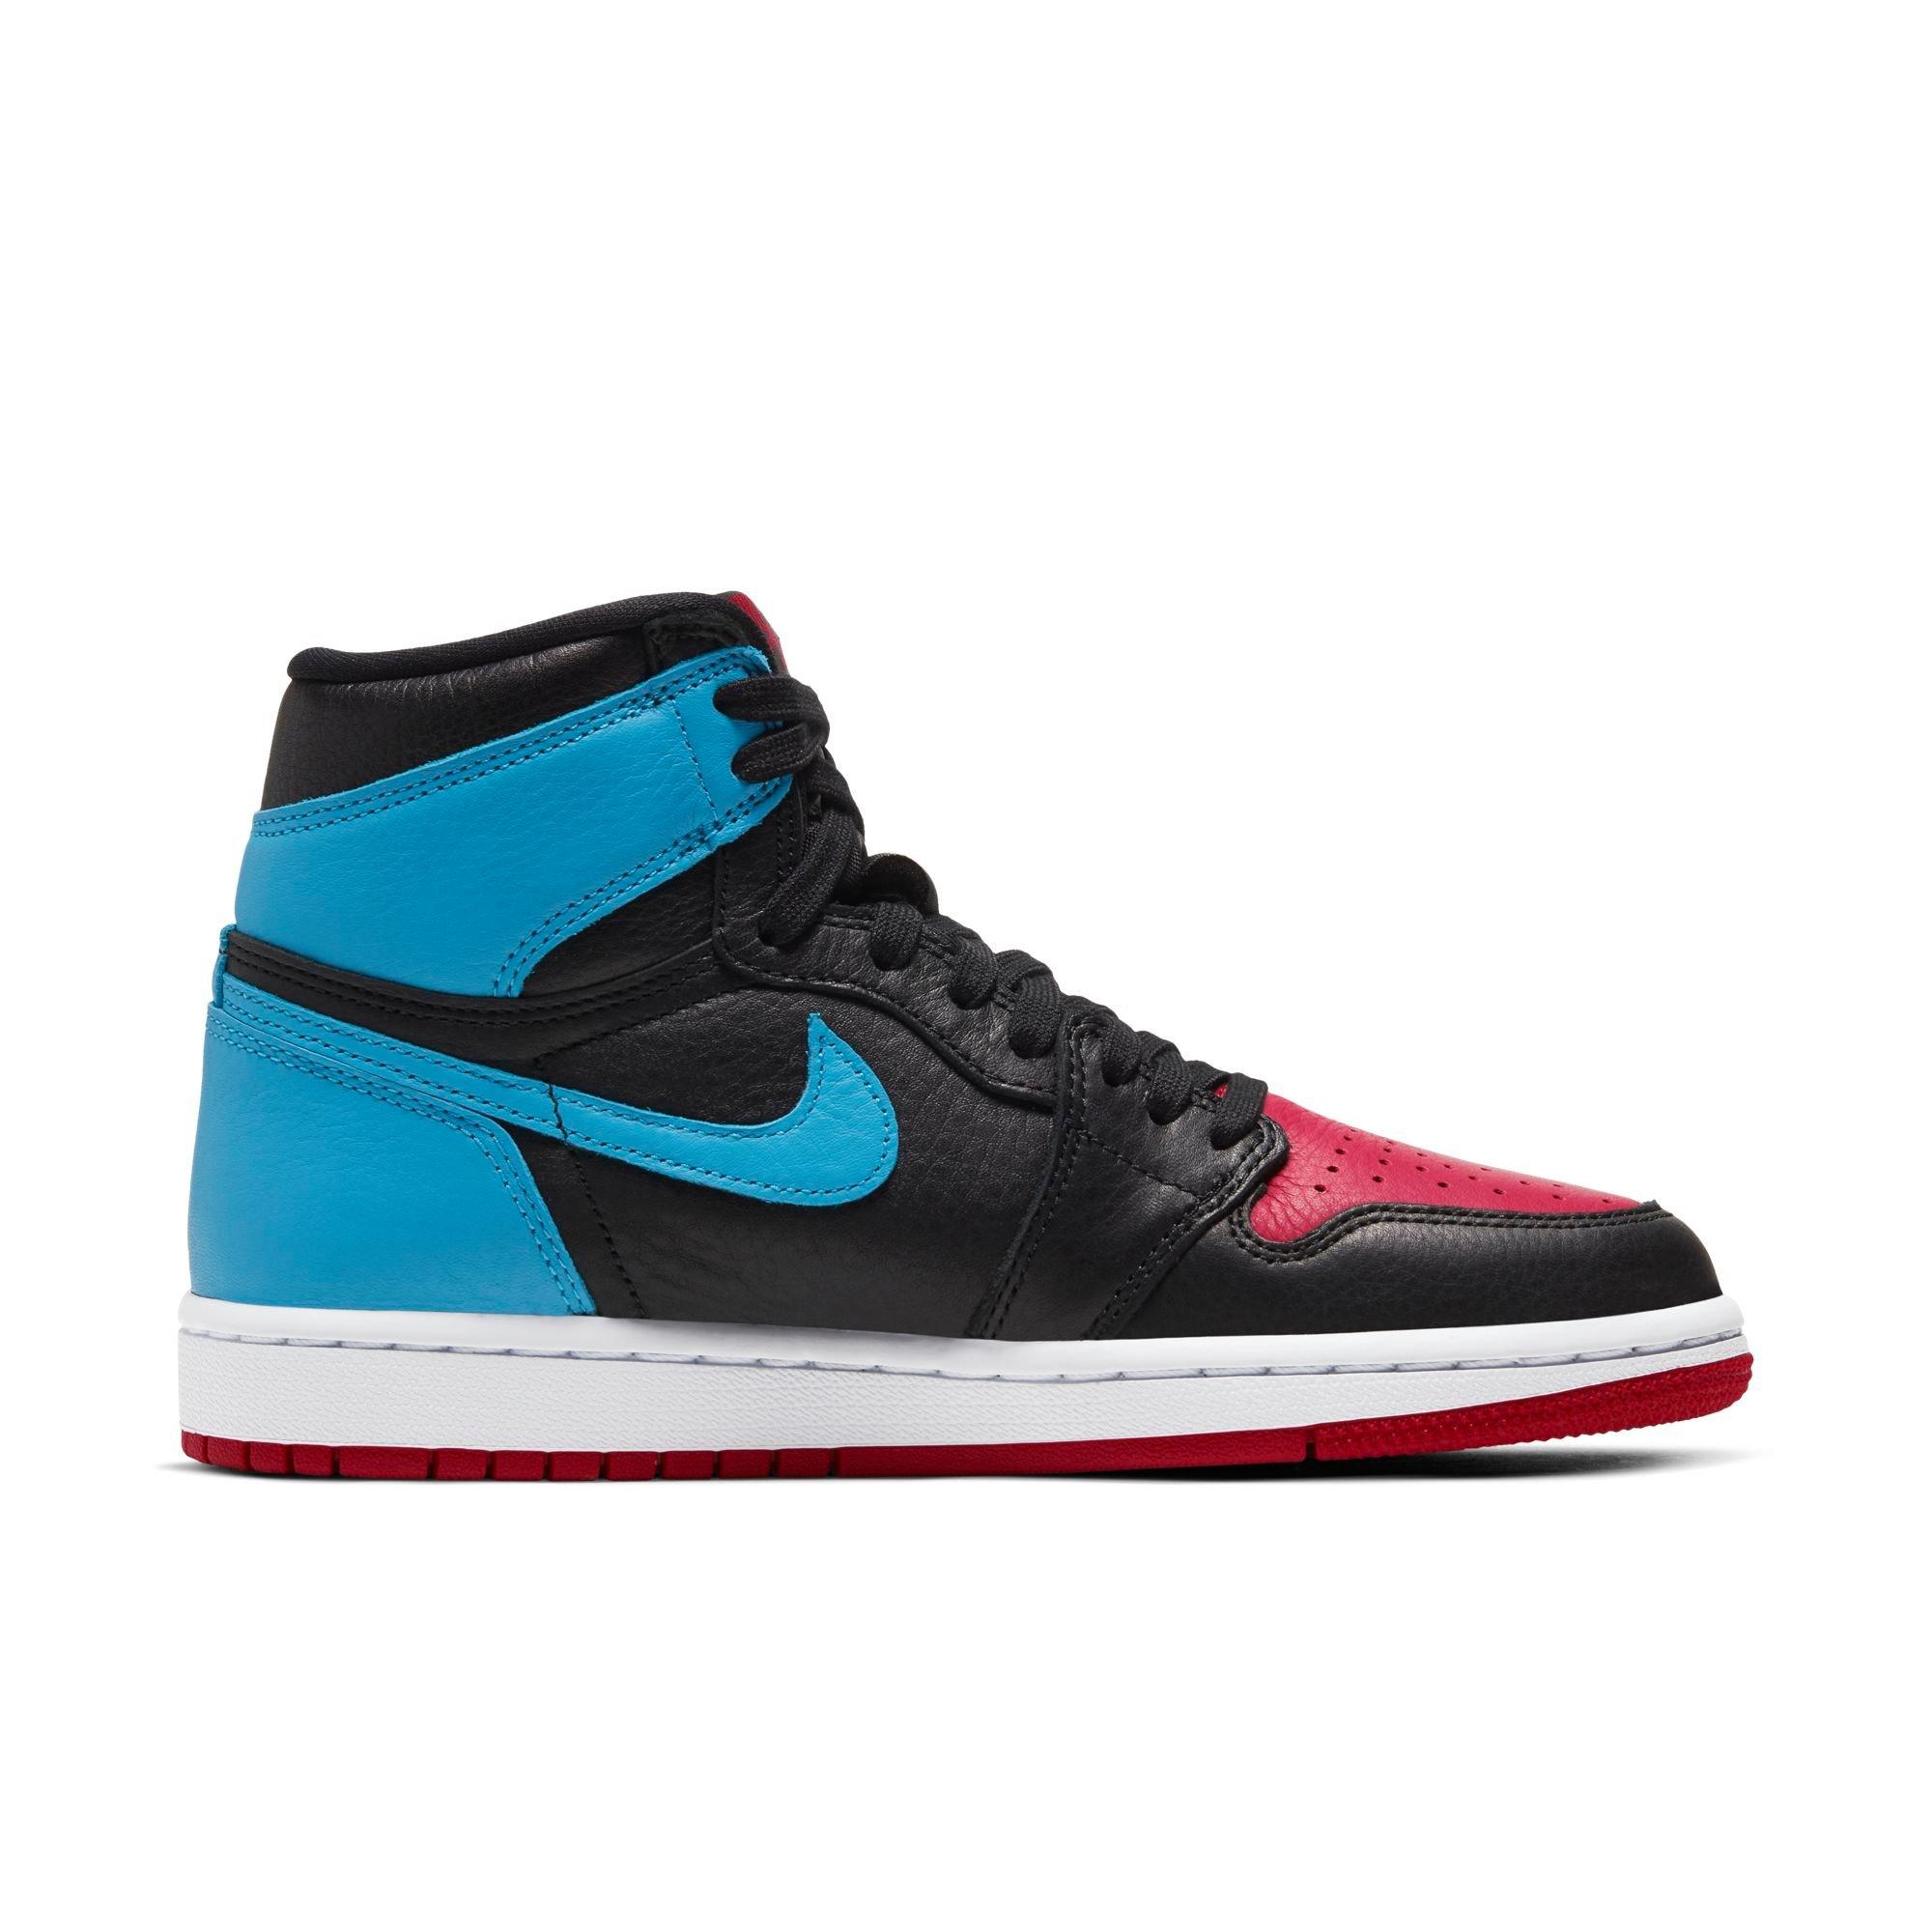 jordan 1 blue and red shiny